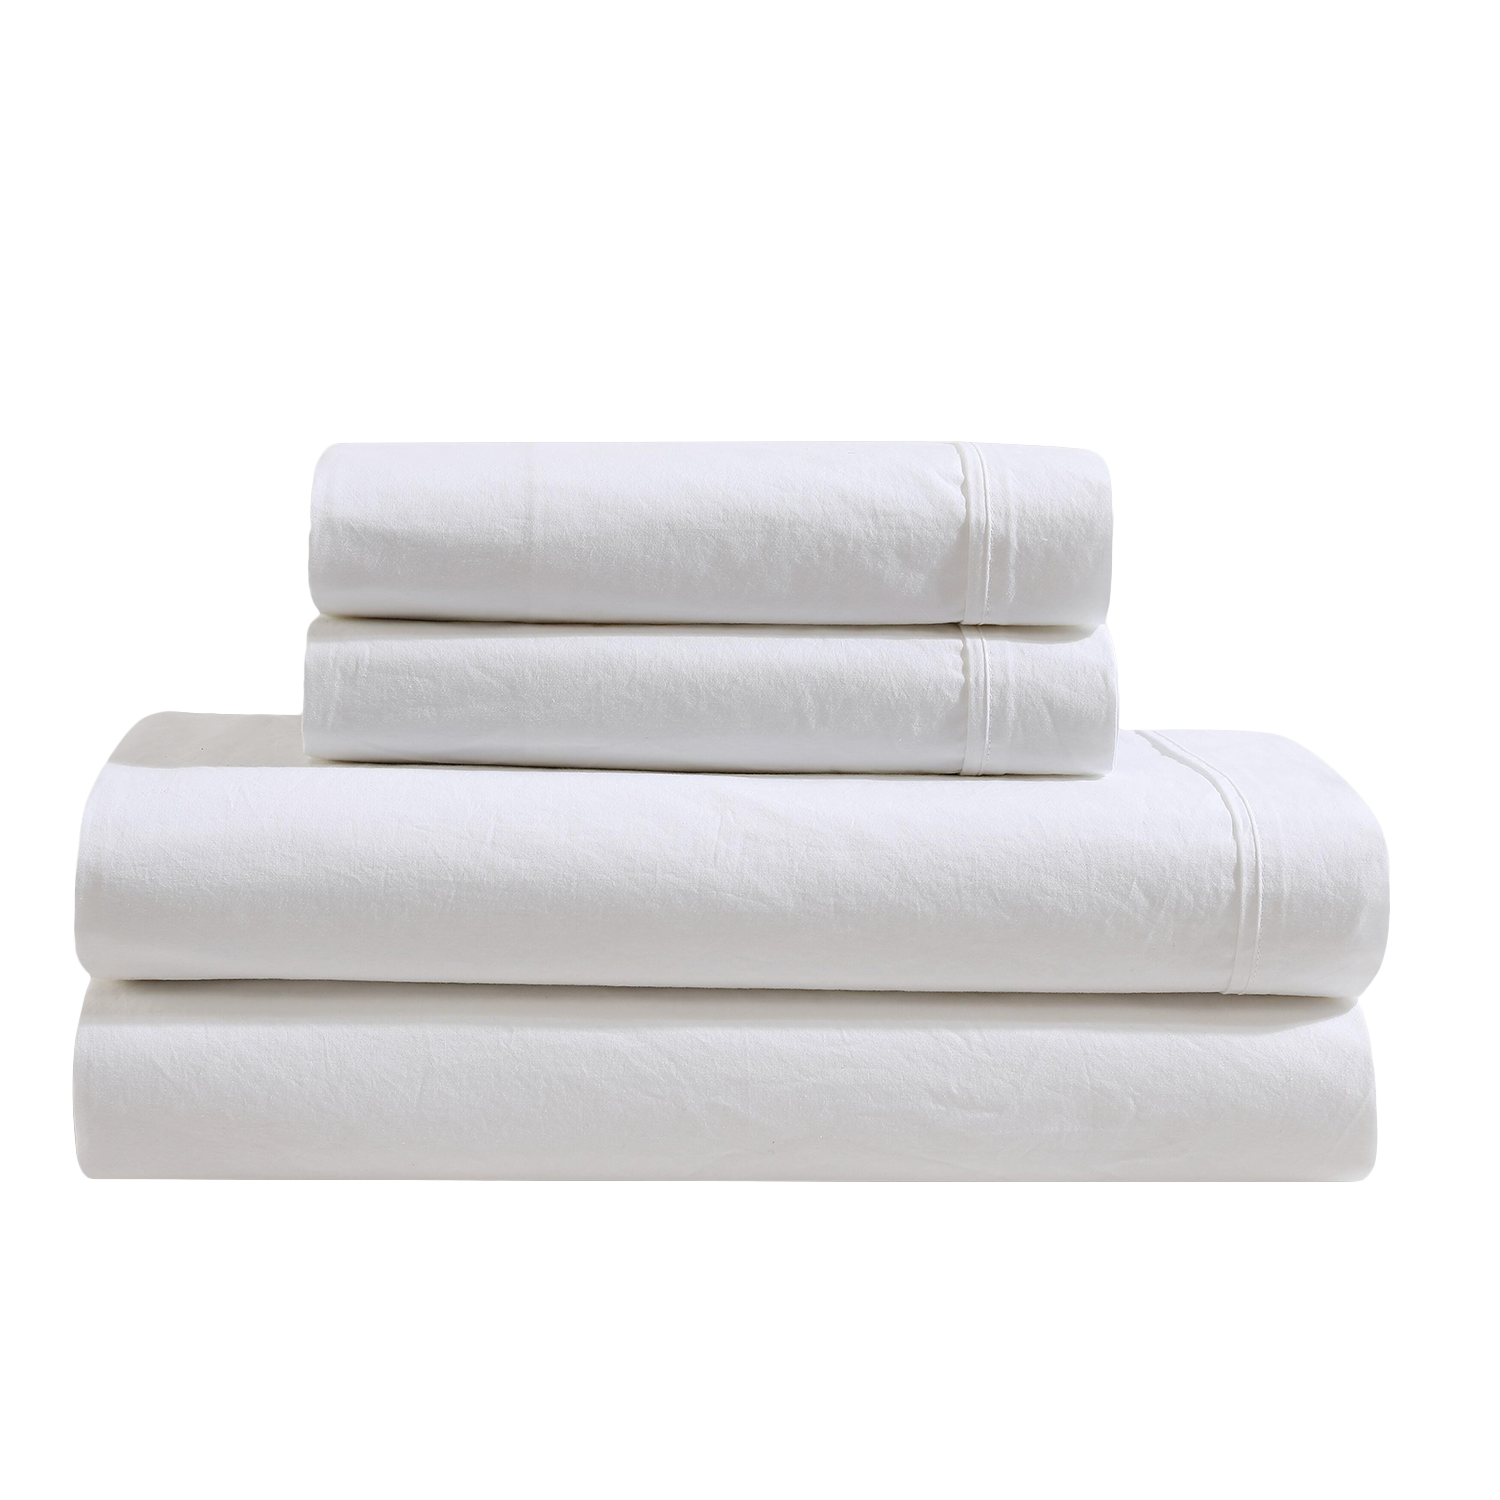 Product shot of white cotton sheets.